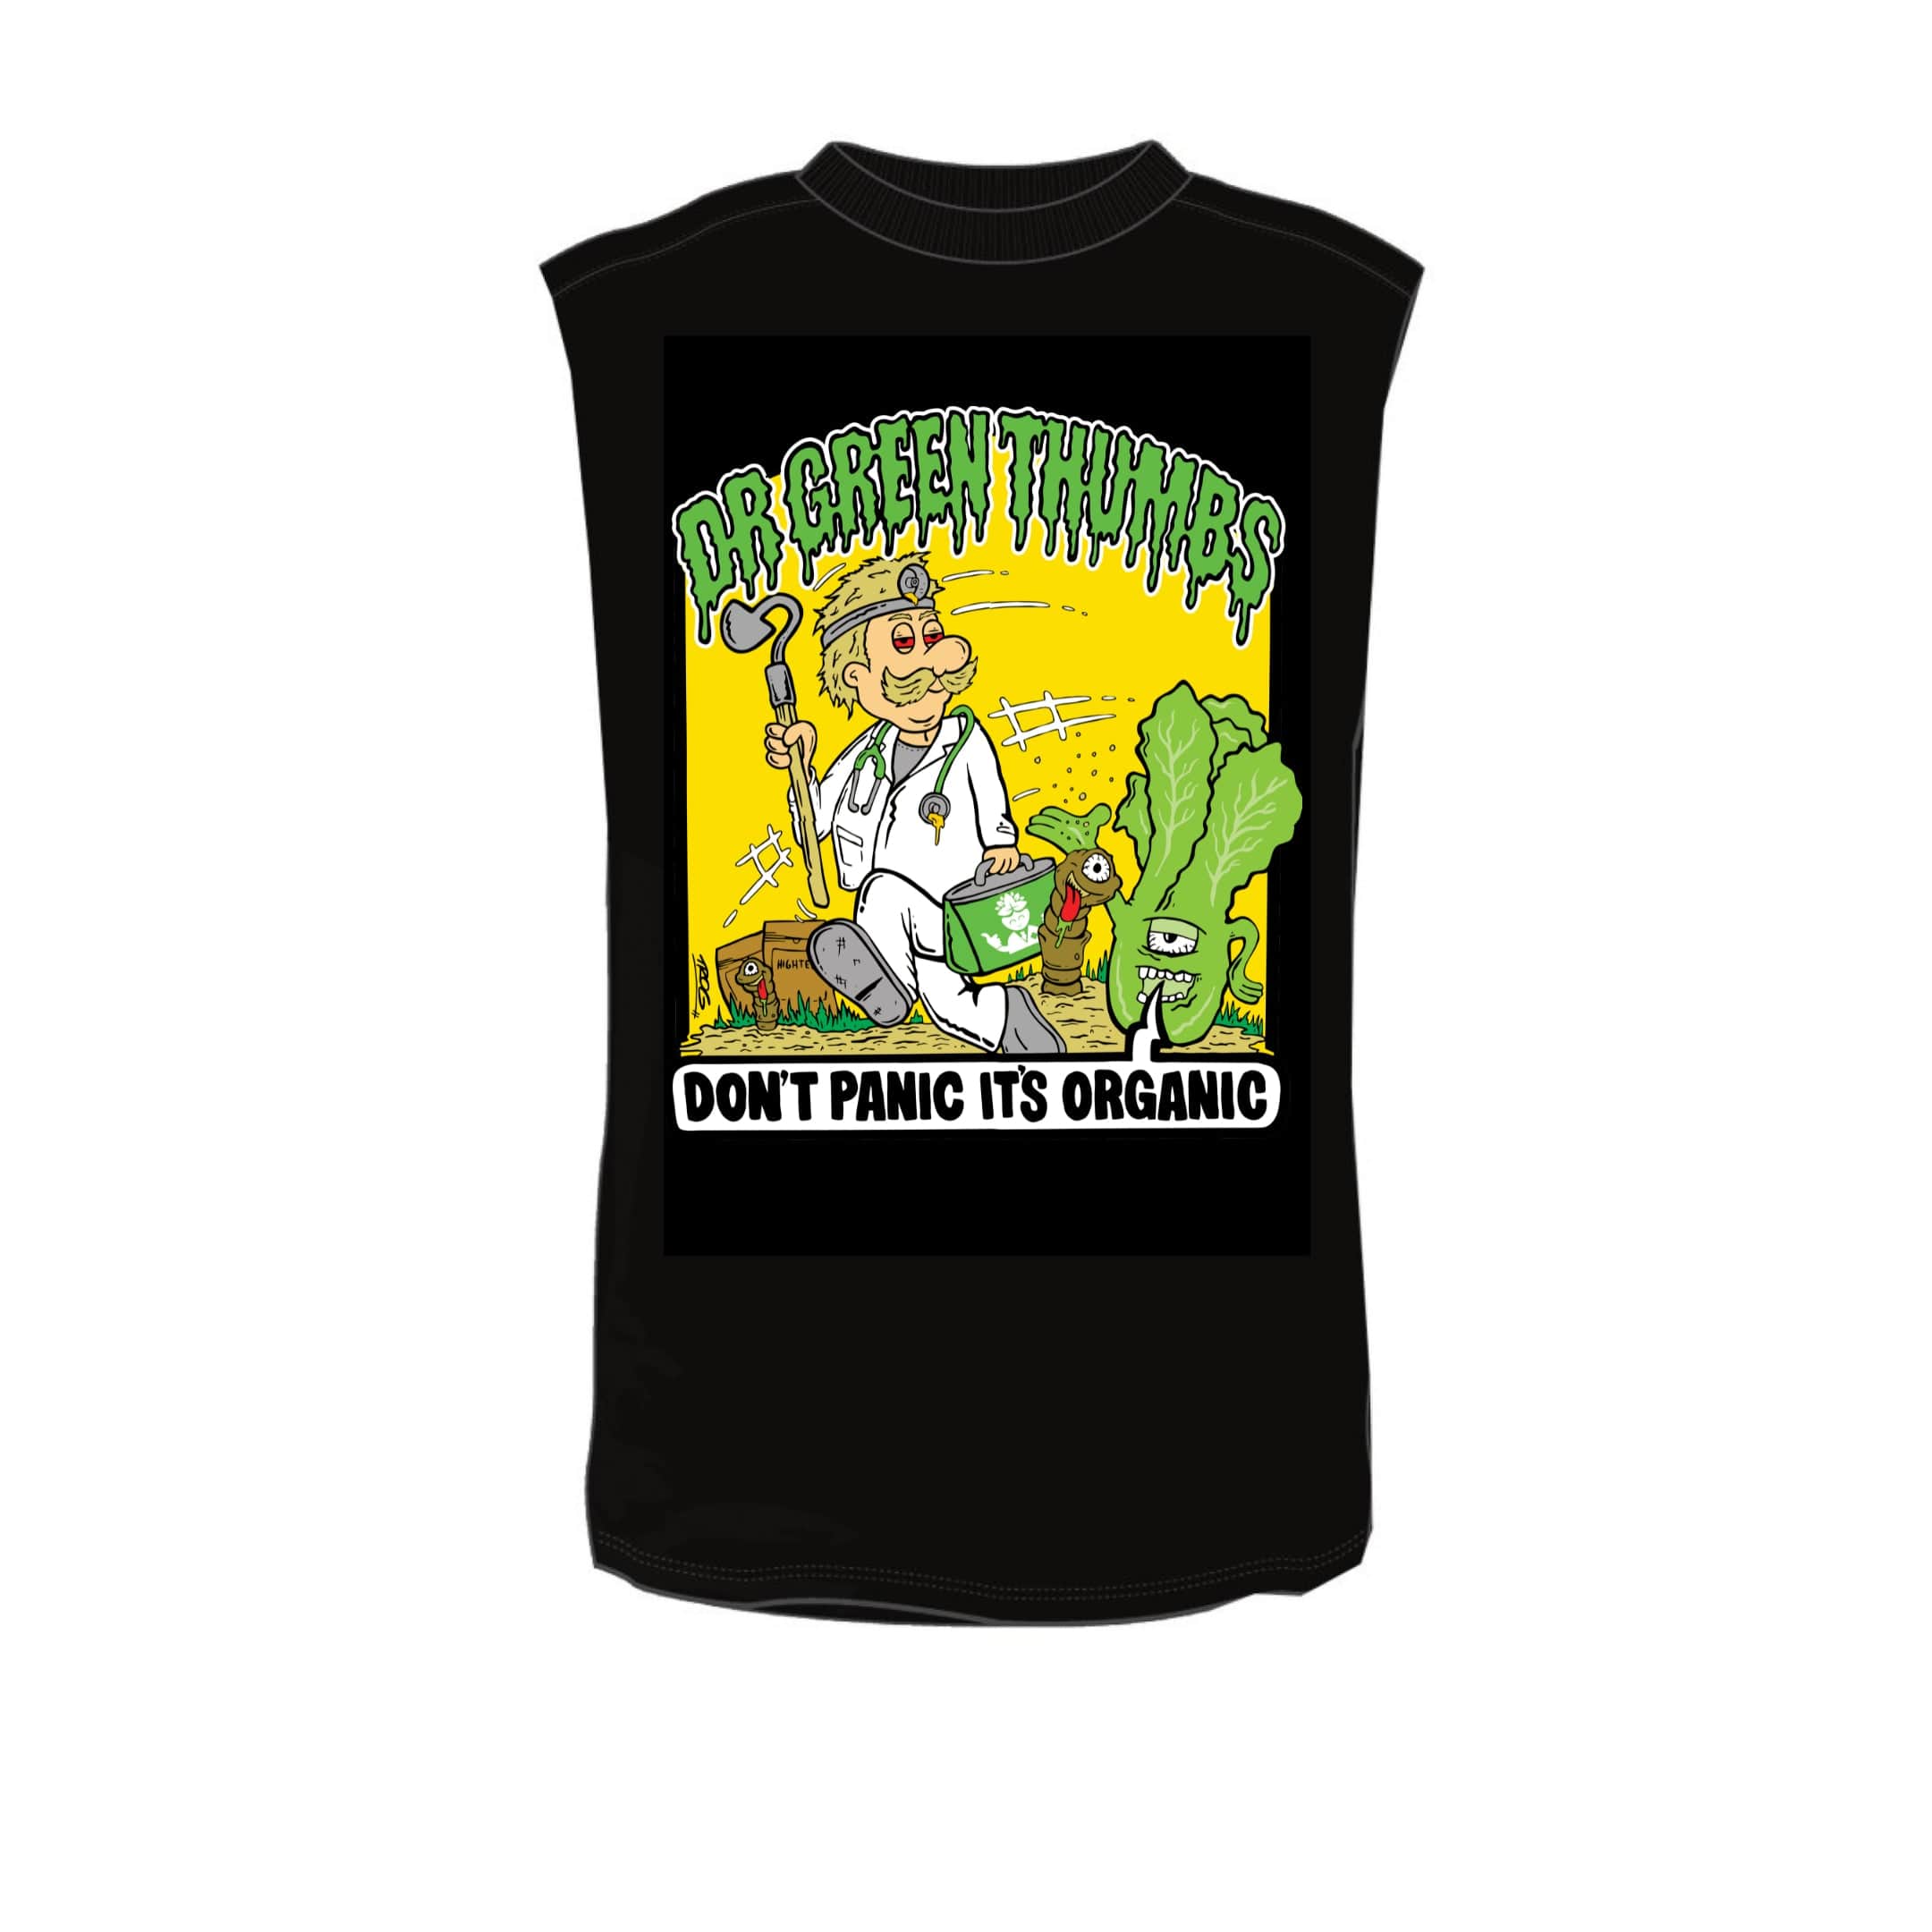 Dr Greenthumbs Gardening Accessories > Clothing & Merchandise Dr Greenthumbs OG Singlet / Muscle Tee (Smelly Clothing)